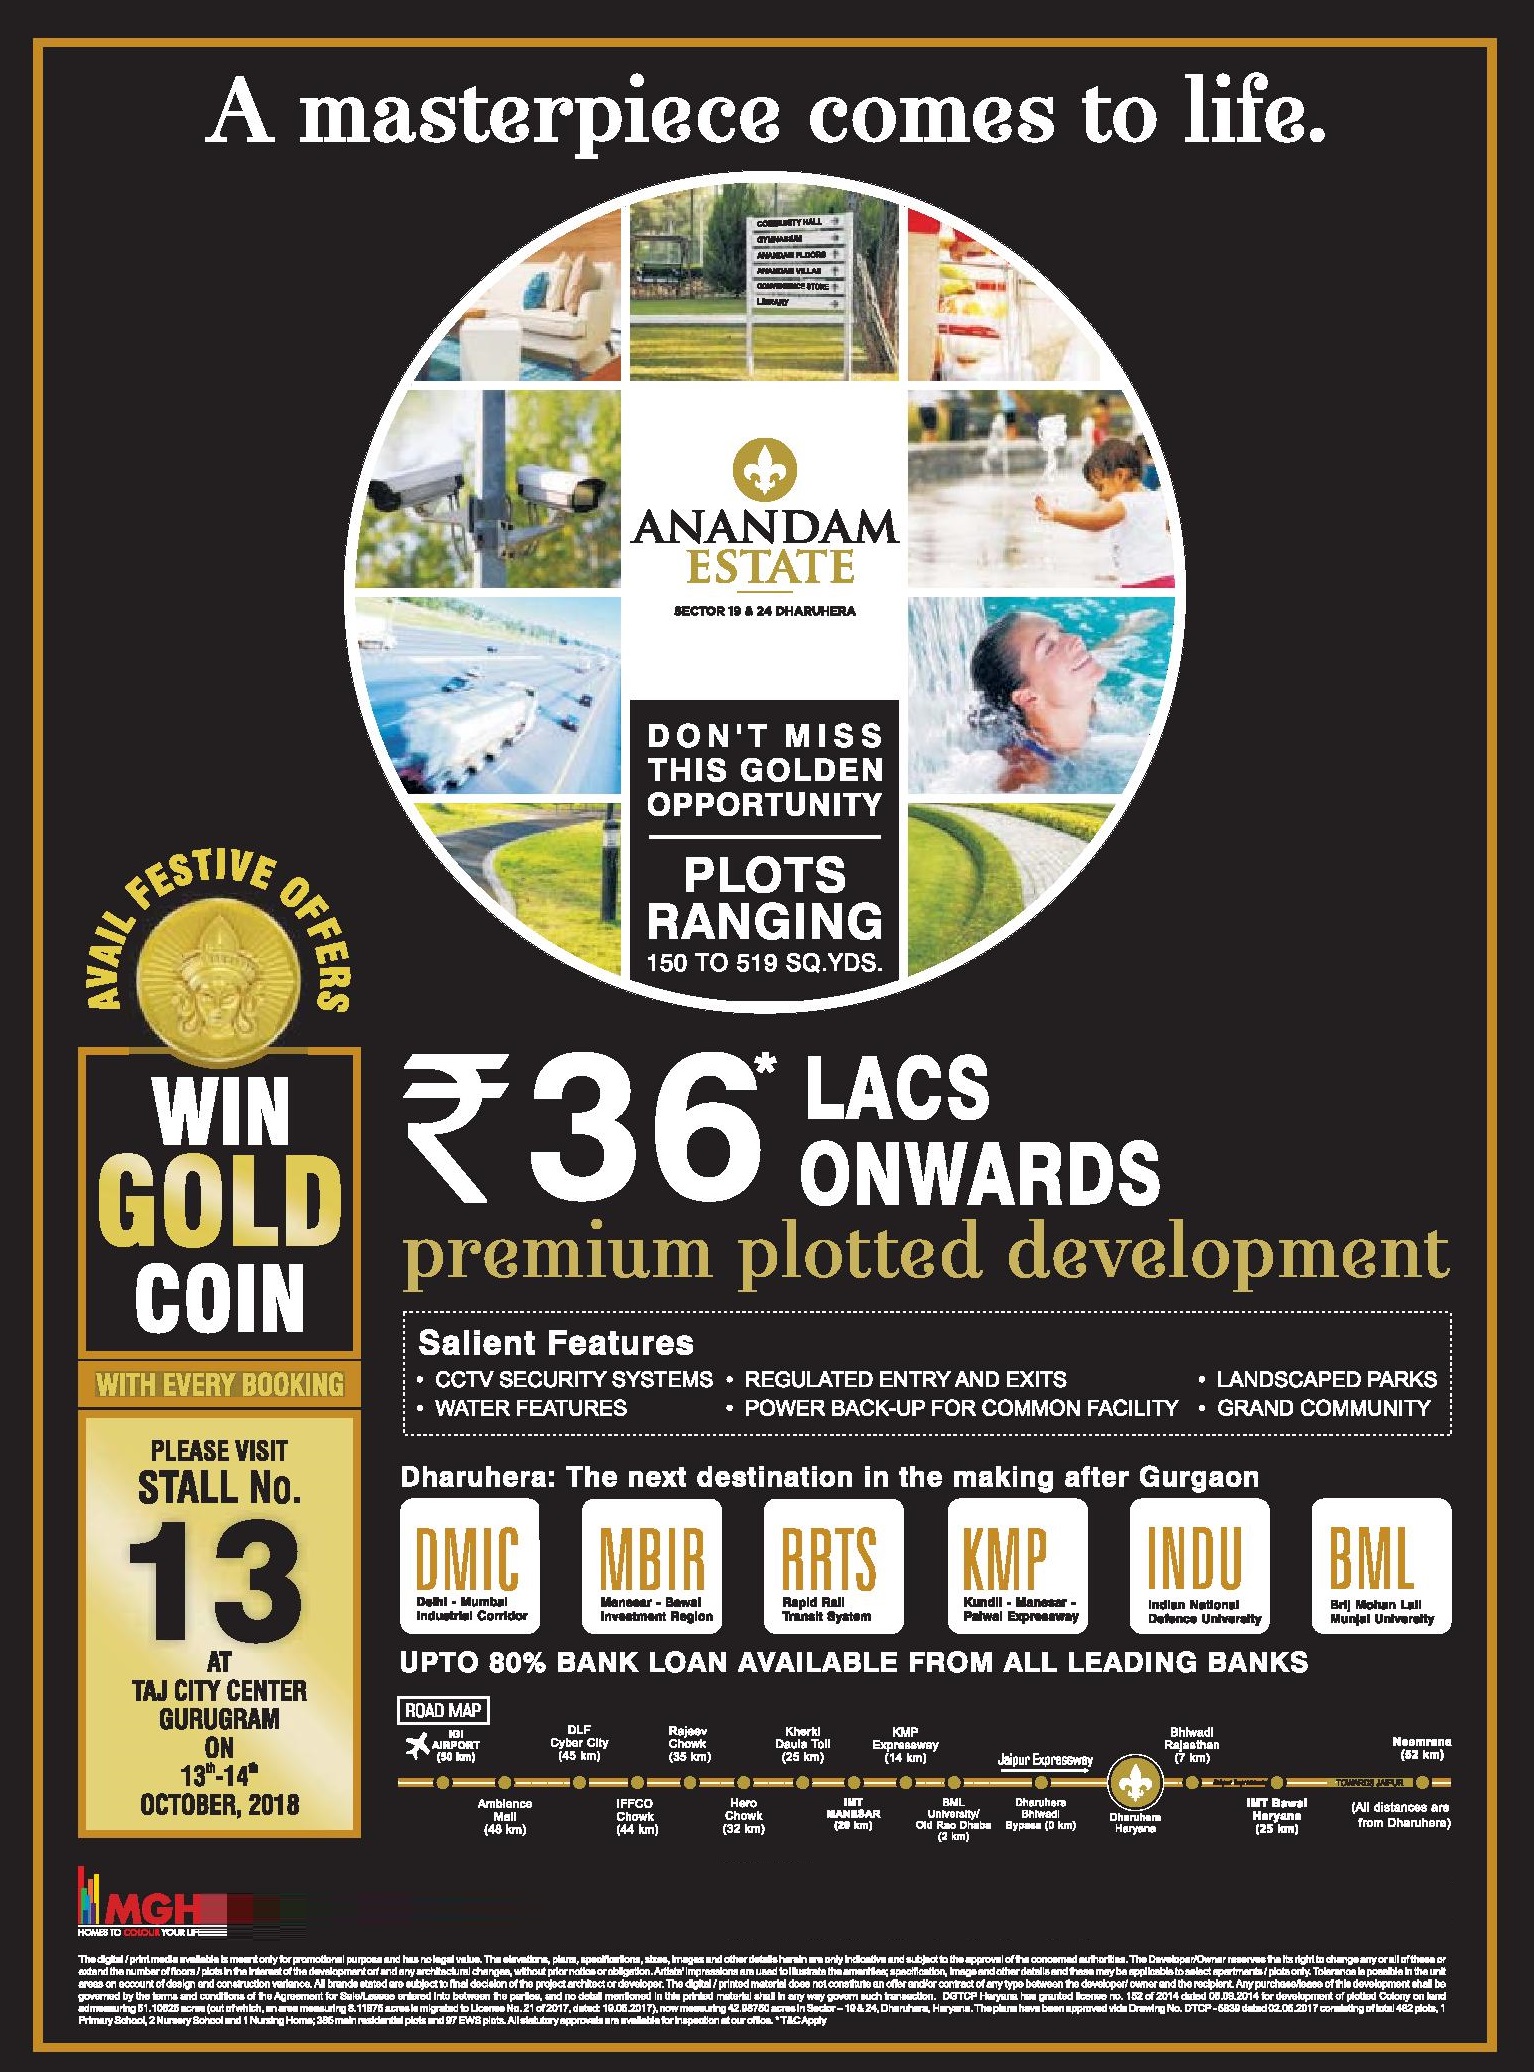 Win gold coin with every booking at MGH Anandam Estate in Dharuhera Update